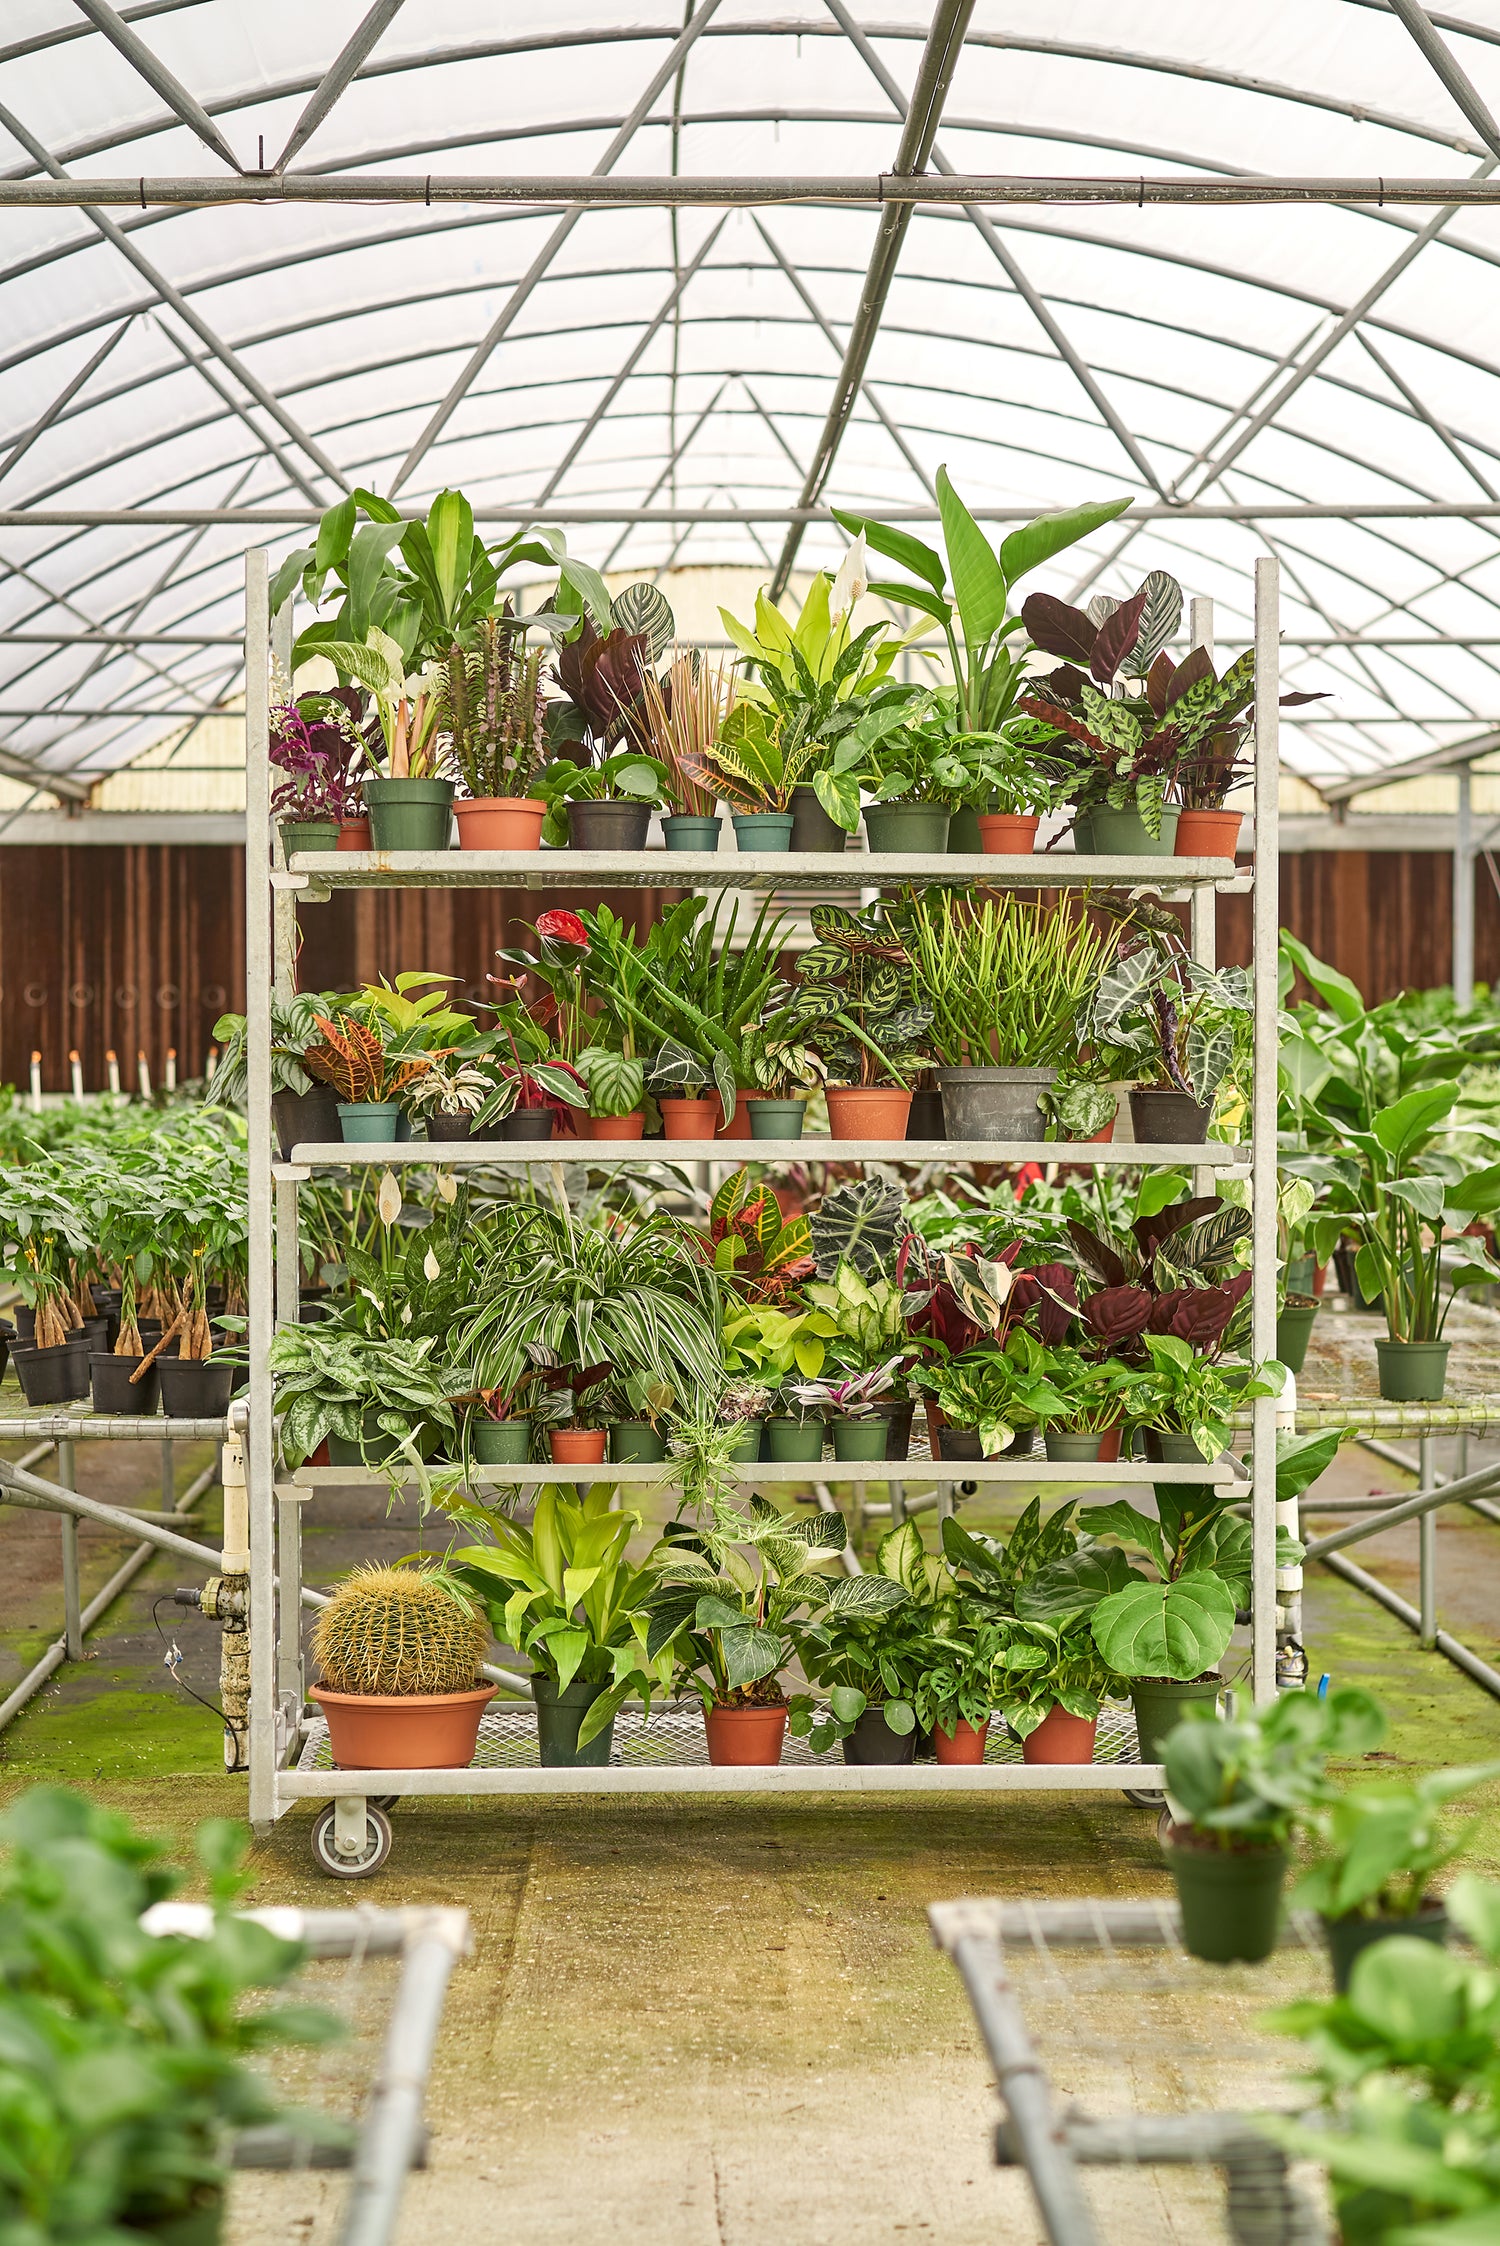 A large variety of plants displayed on a nursery cart surrounded by more plants in a nursery.